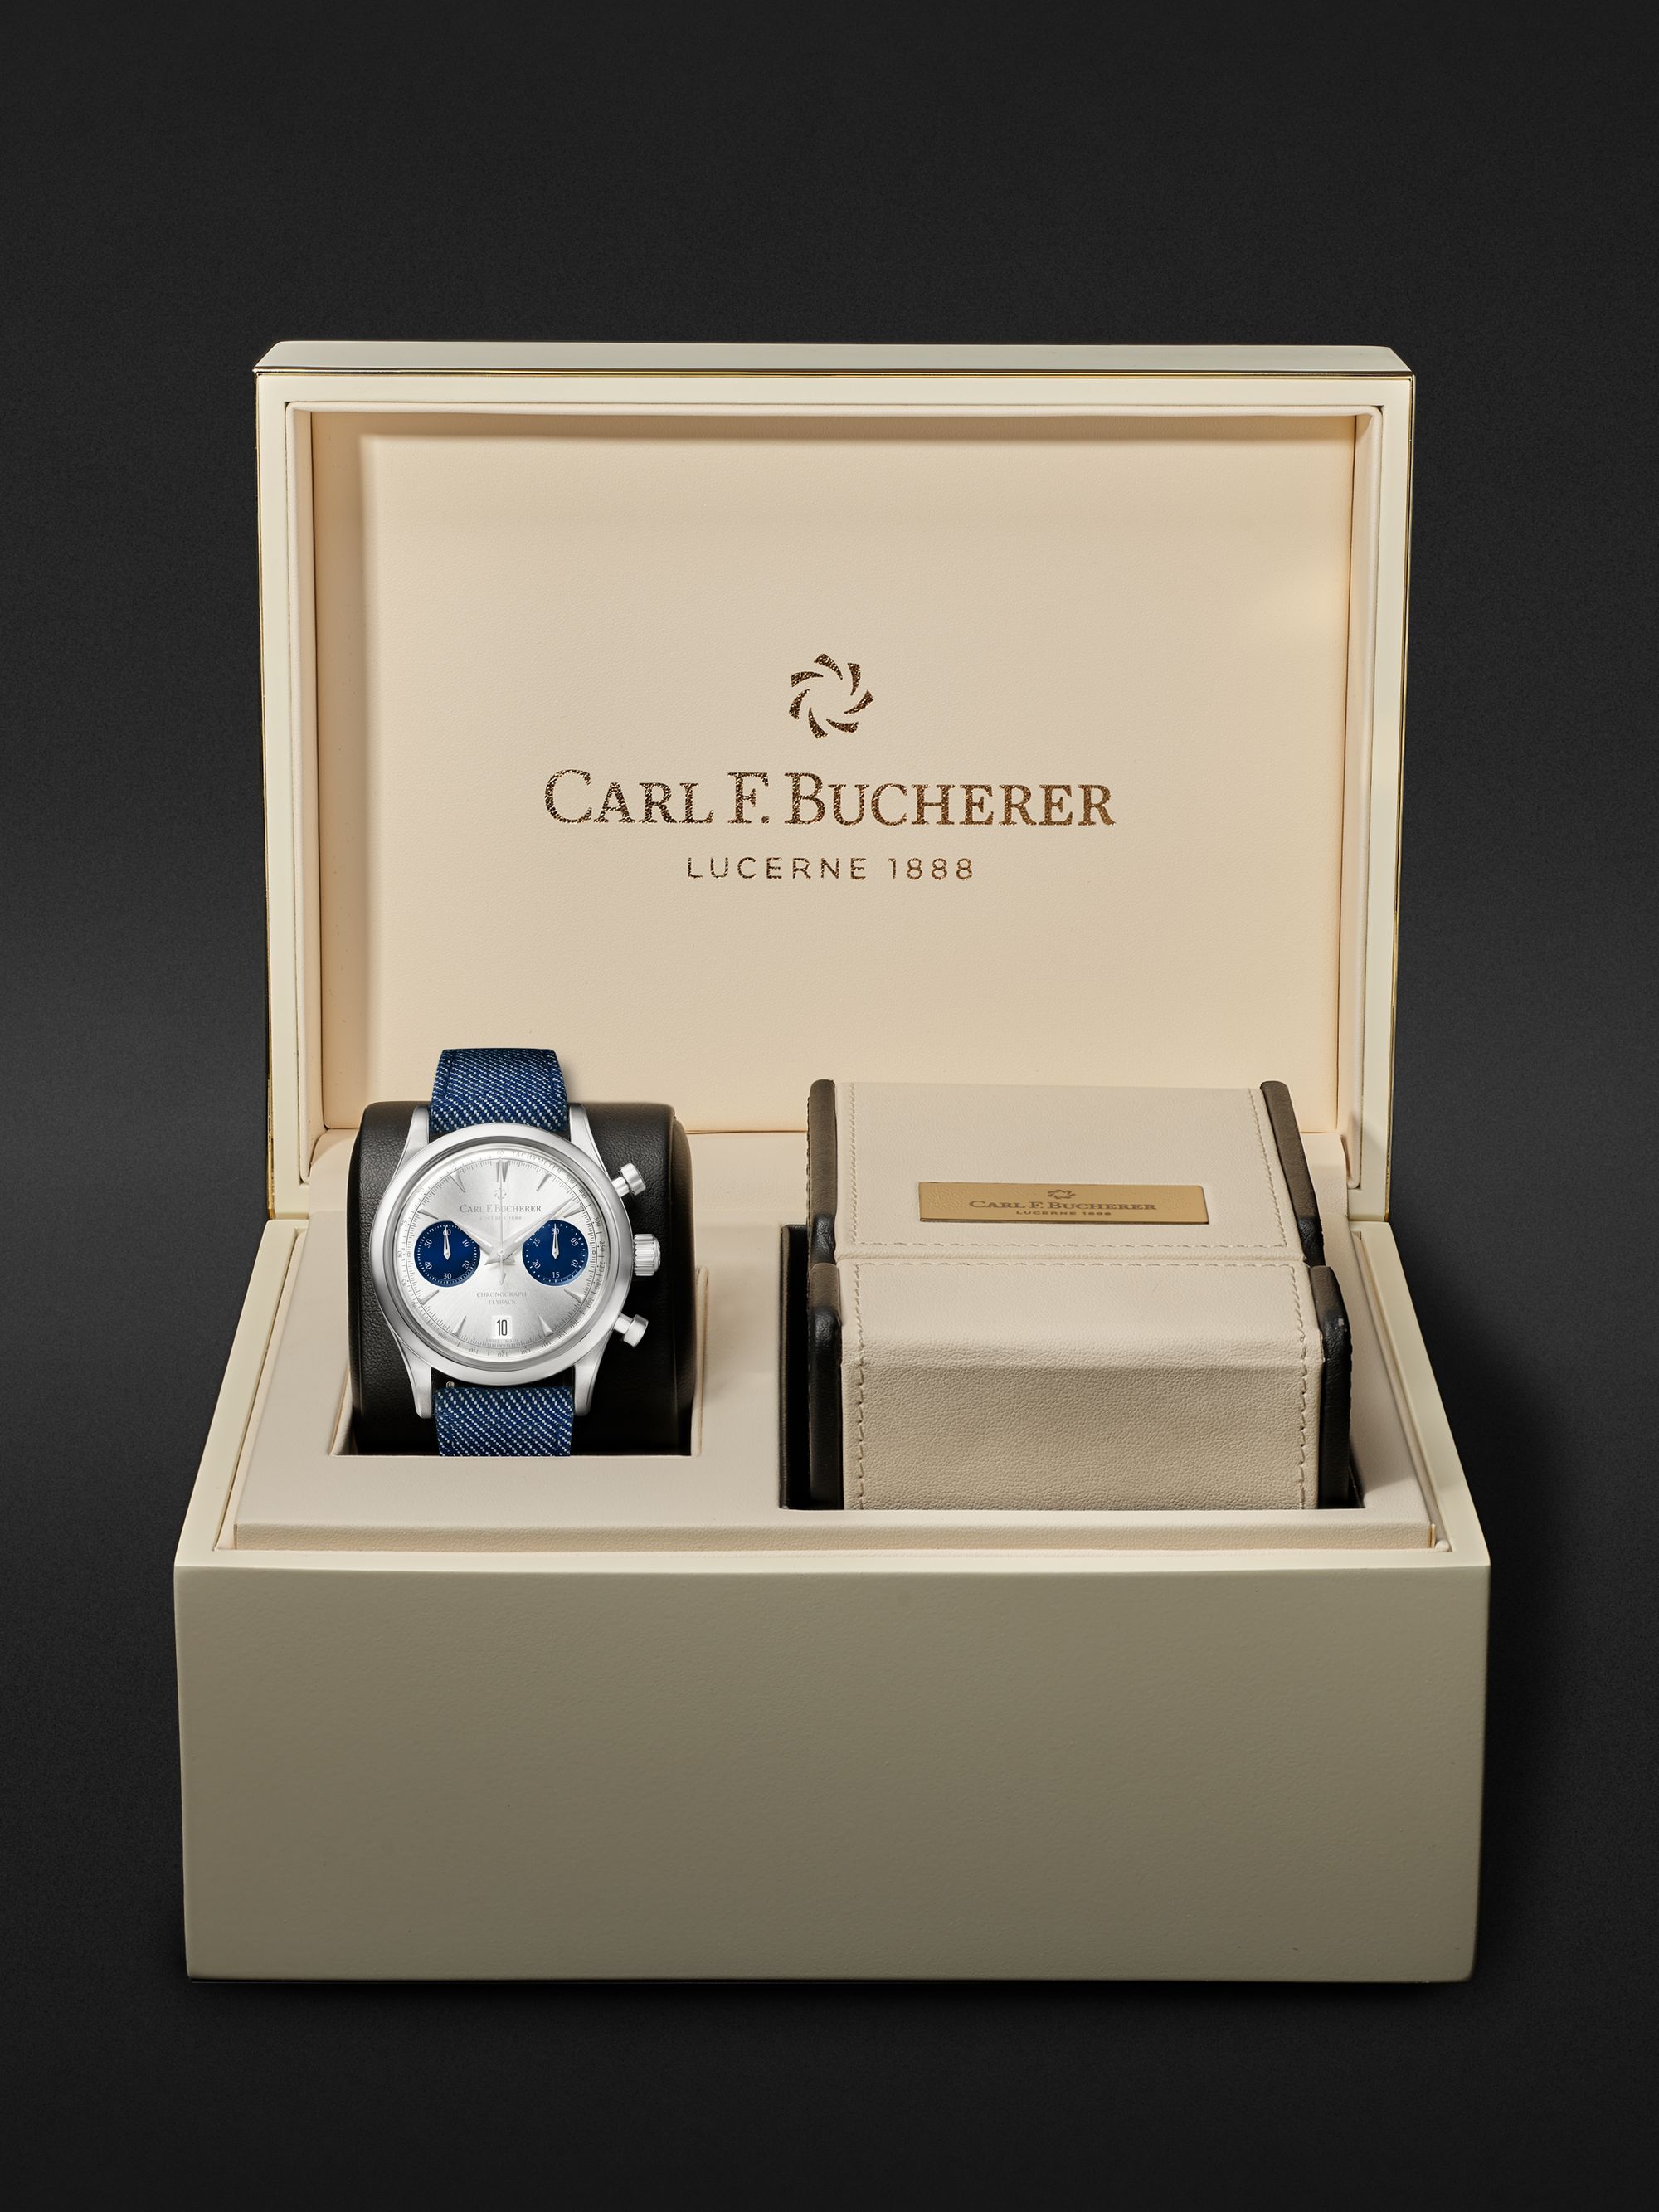 CARL F. BUCHERER Manero Flyback Chronograph Automatic 40mm, Steel and Canvas Watch, Ref. No. 00.10927.08.13.03